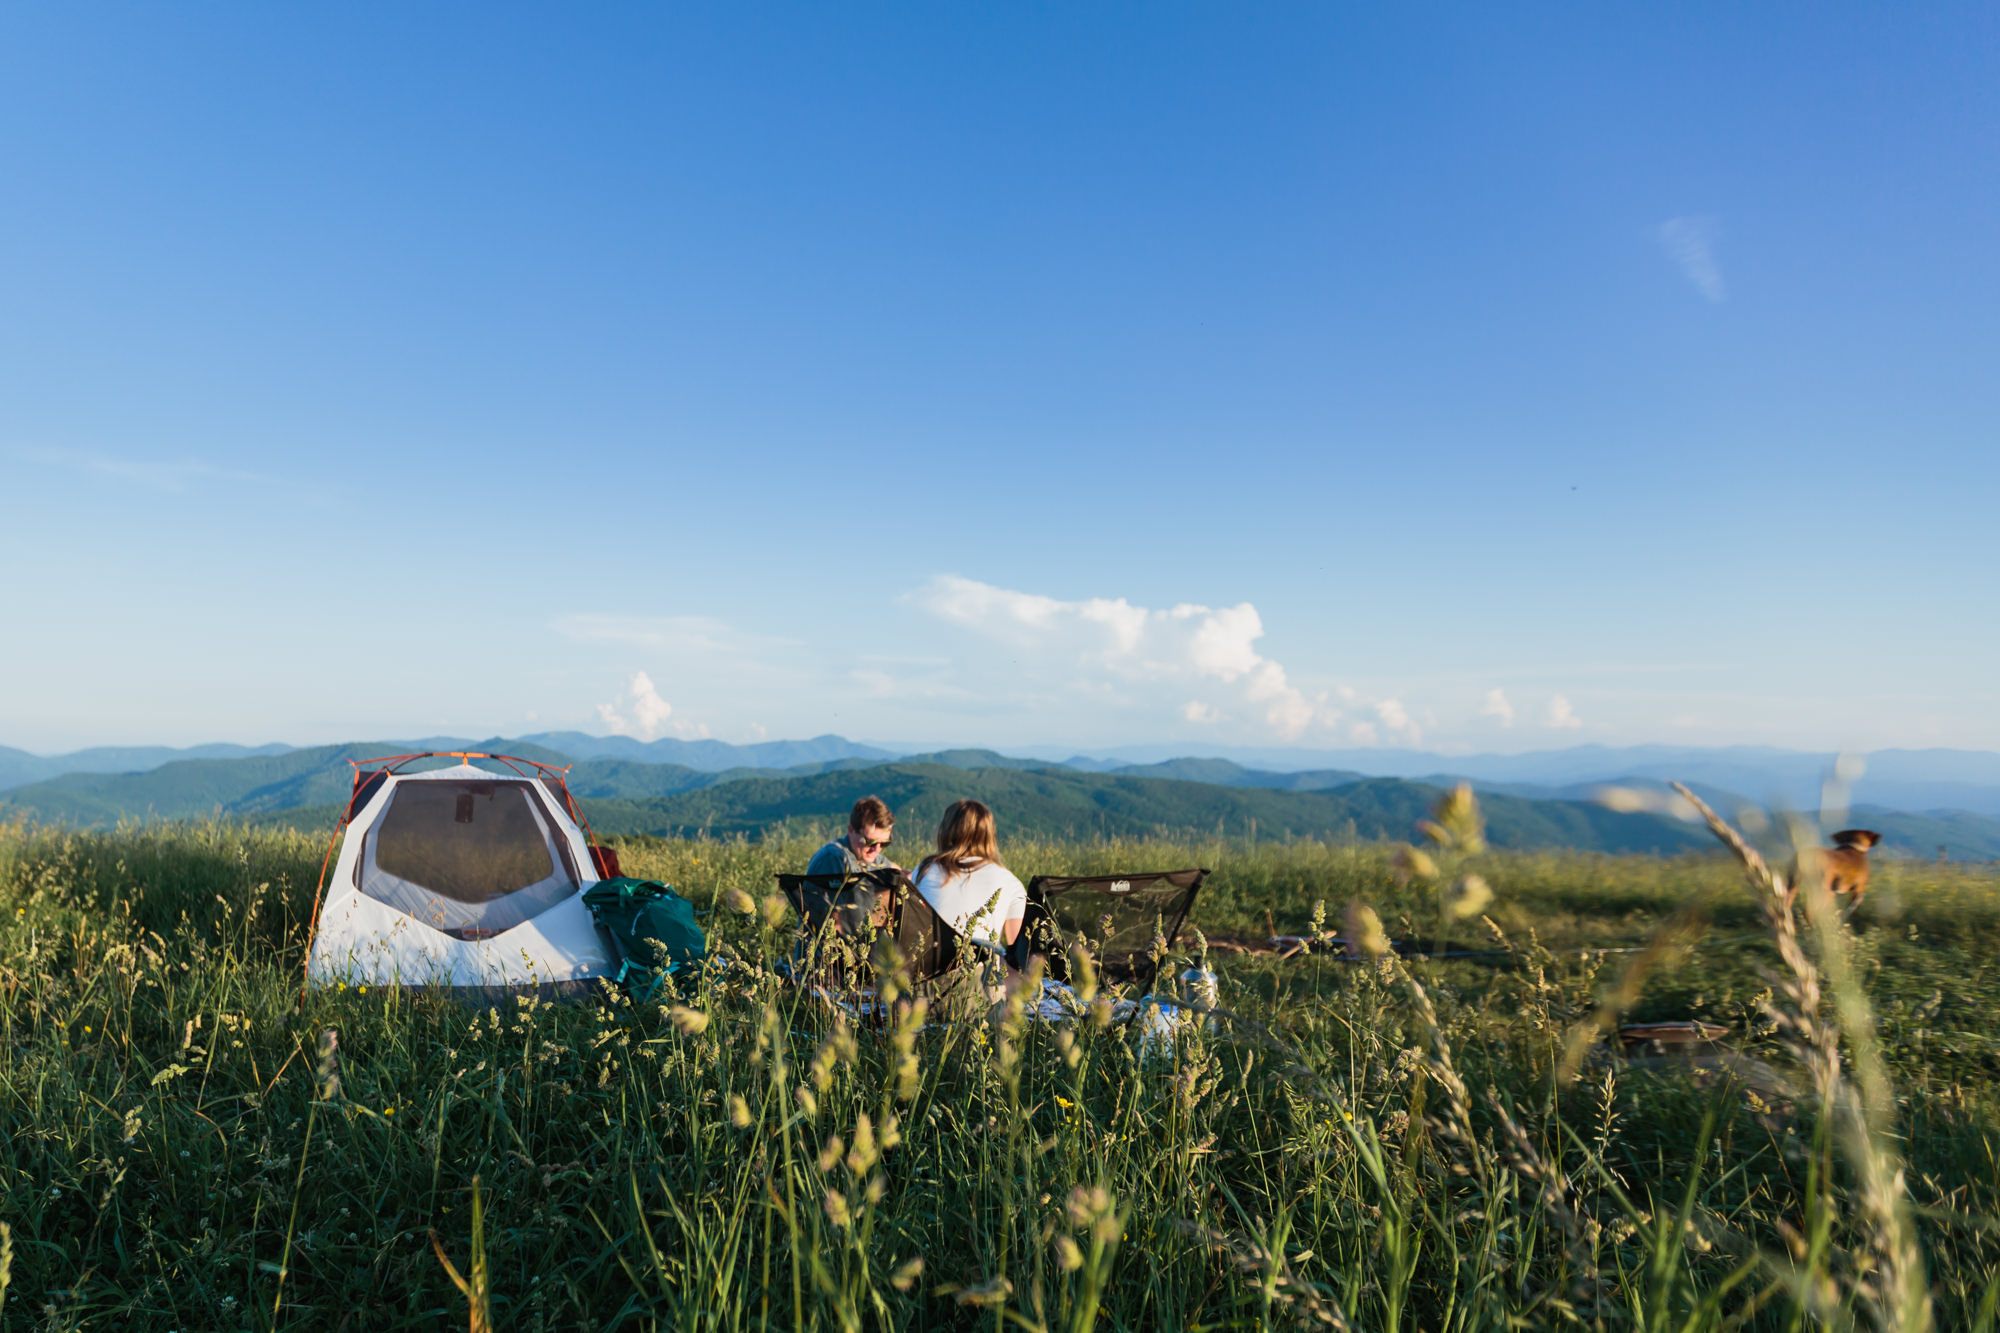 date night camping in tent max patch